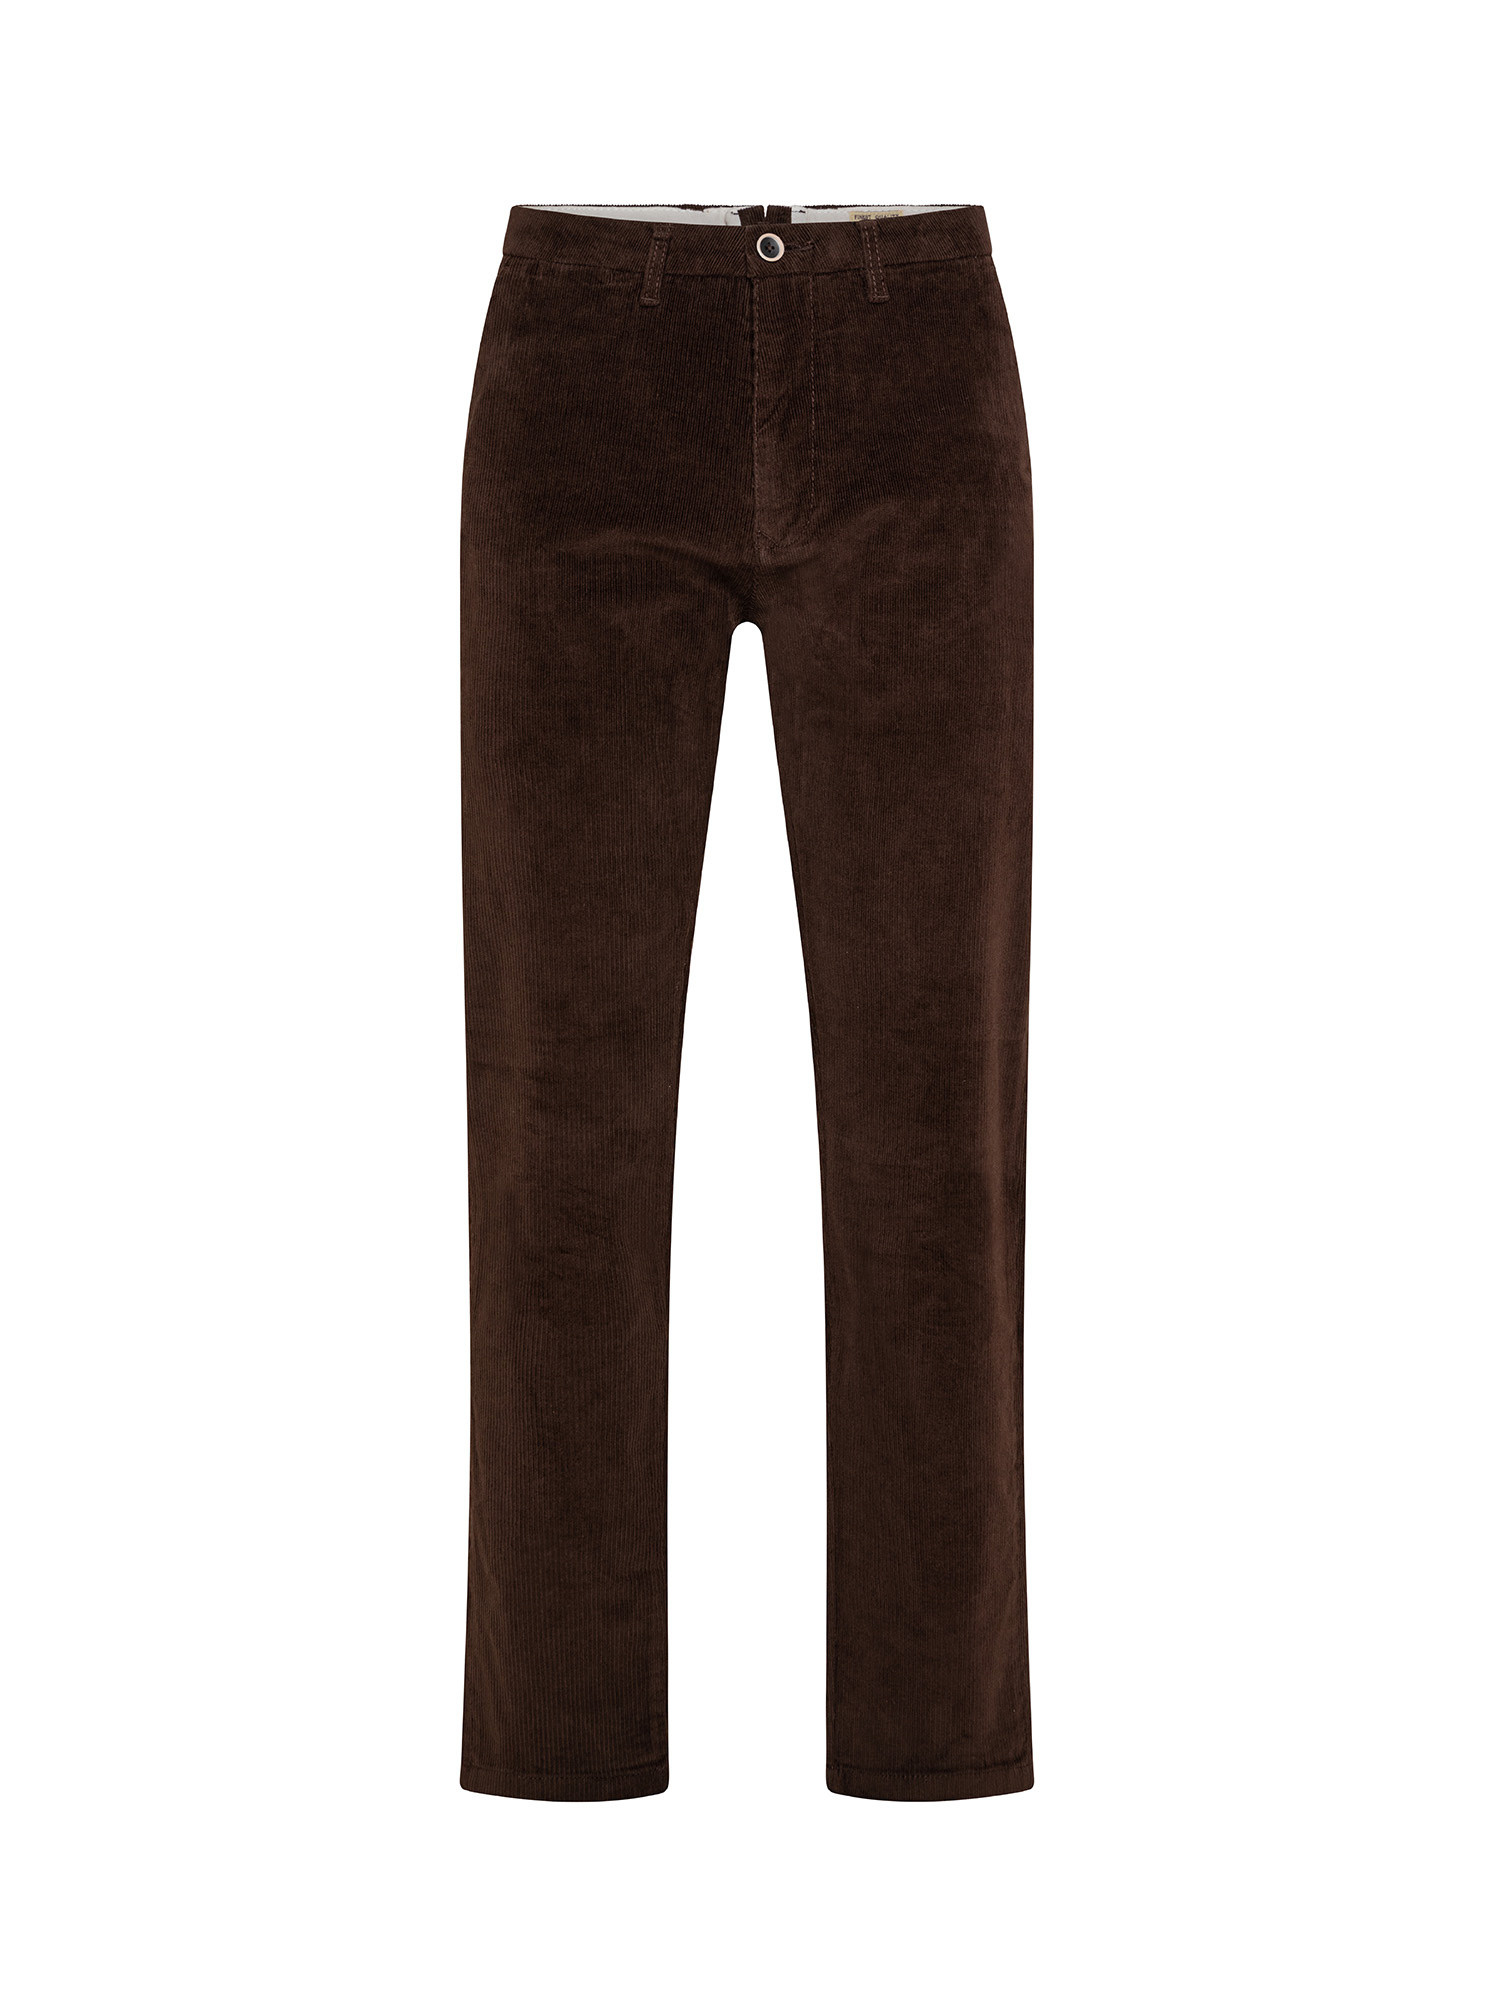 JCT - Slim fit velvet chino trousers, Brown, large image number 0